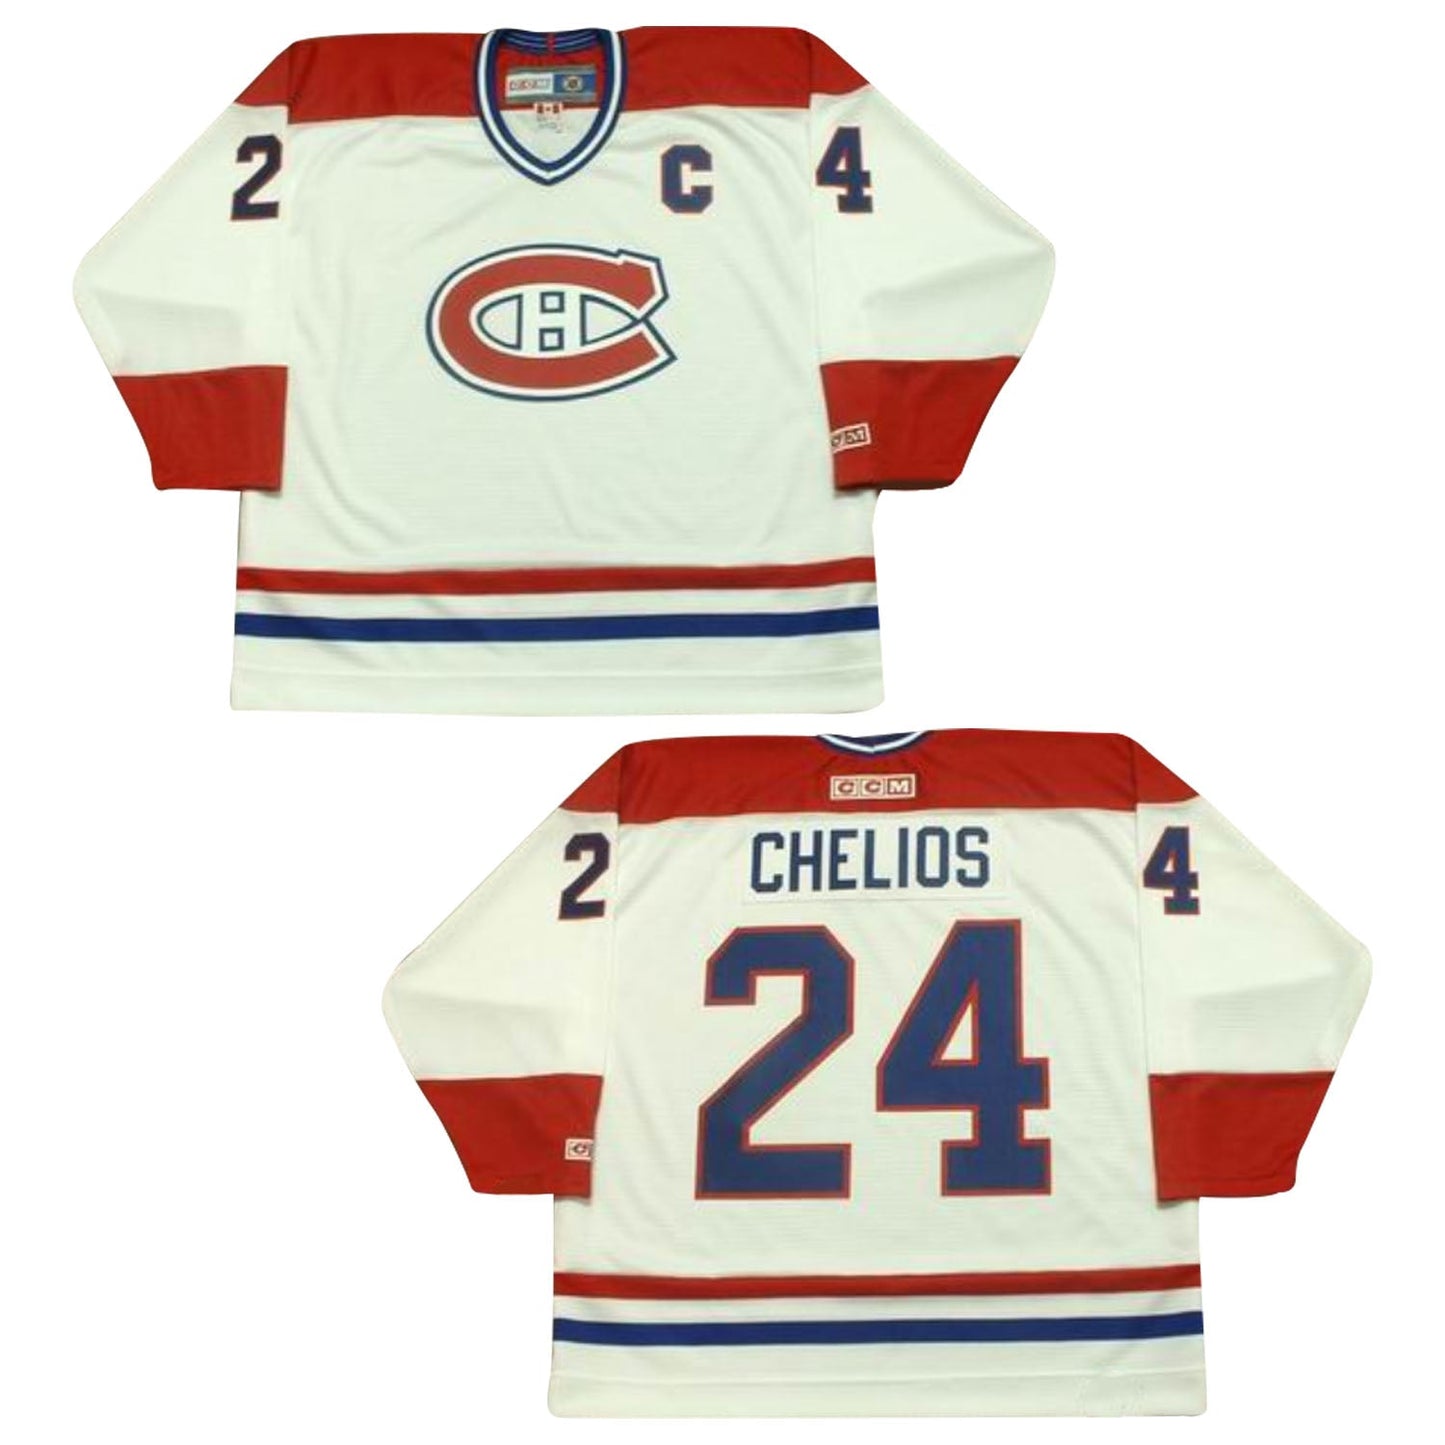 NHL Chris Chelios Montreal Canadians 24 Jersey